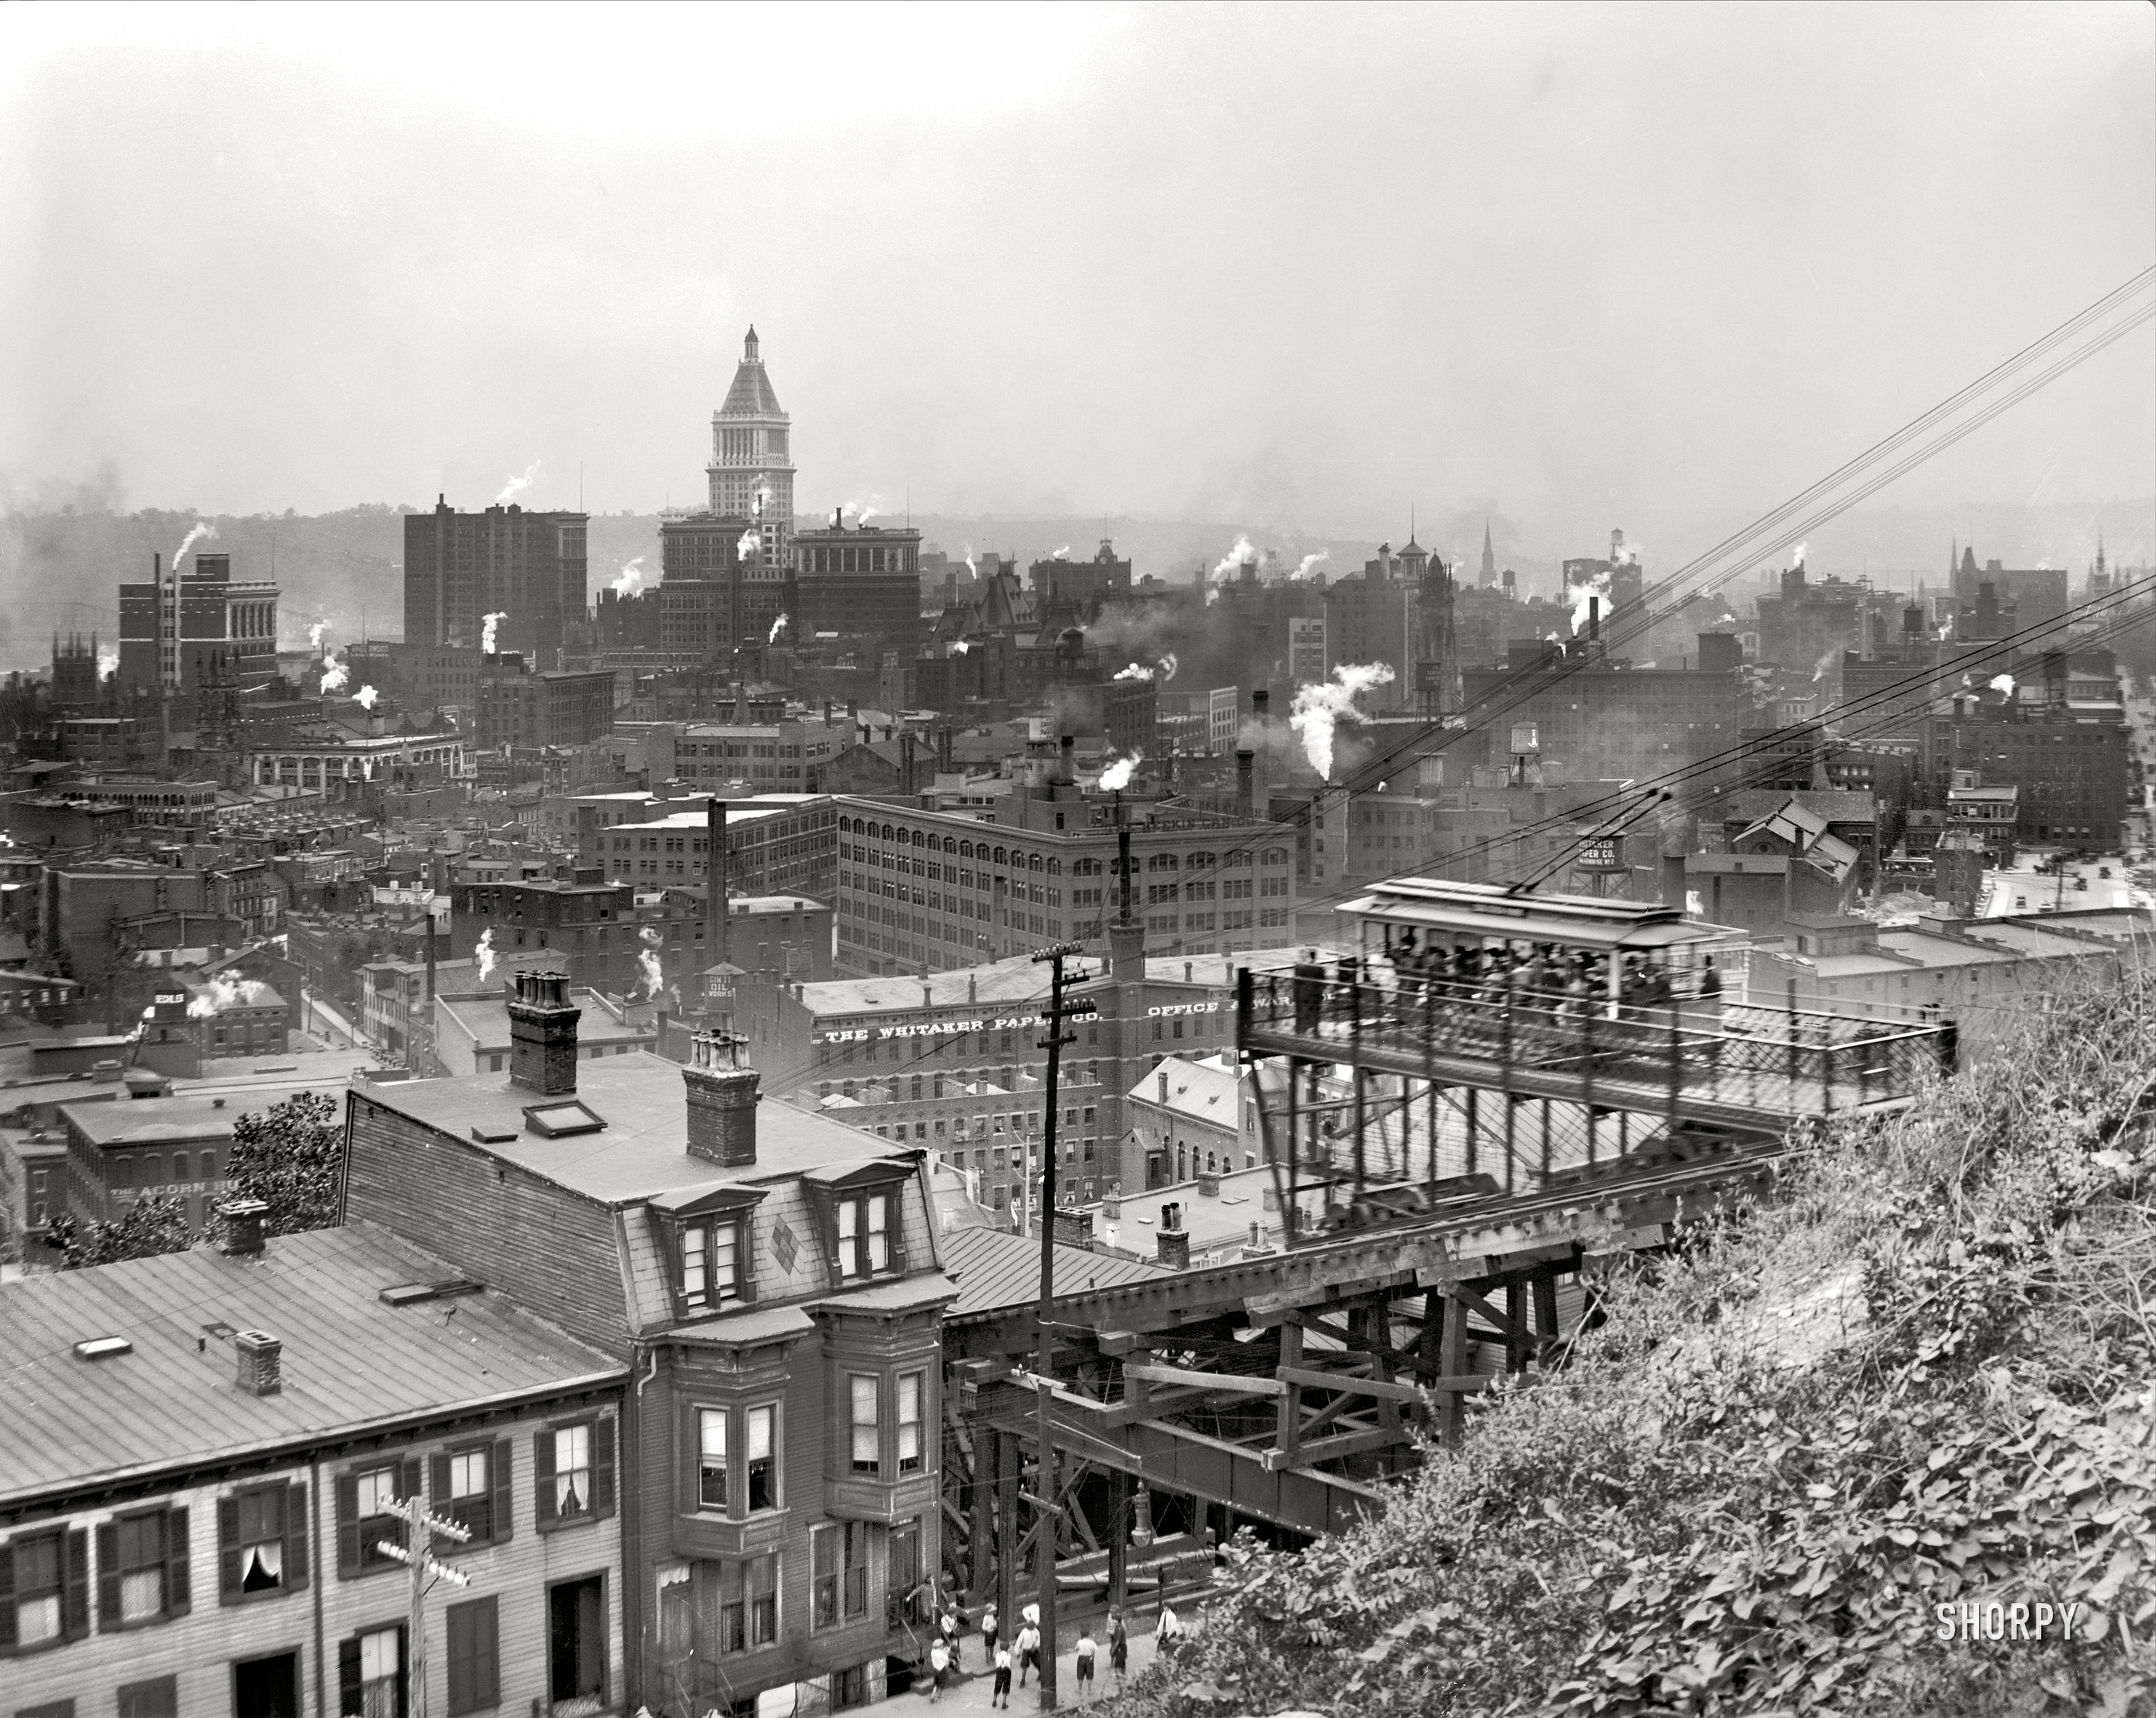 Cincinnati, Ohio, circa 1915. "View from Mount Adams." At right, a streetcar on the incline railway; the Union Central Insurance tower rises in the distance. 8x10 inch dry plate glass negative, Detroit Publishing Company. View full size.